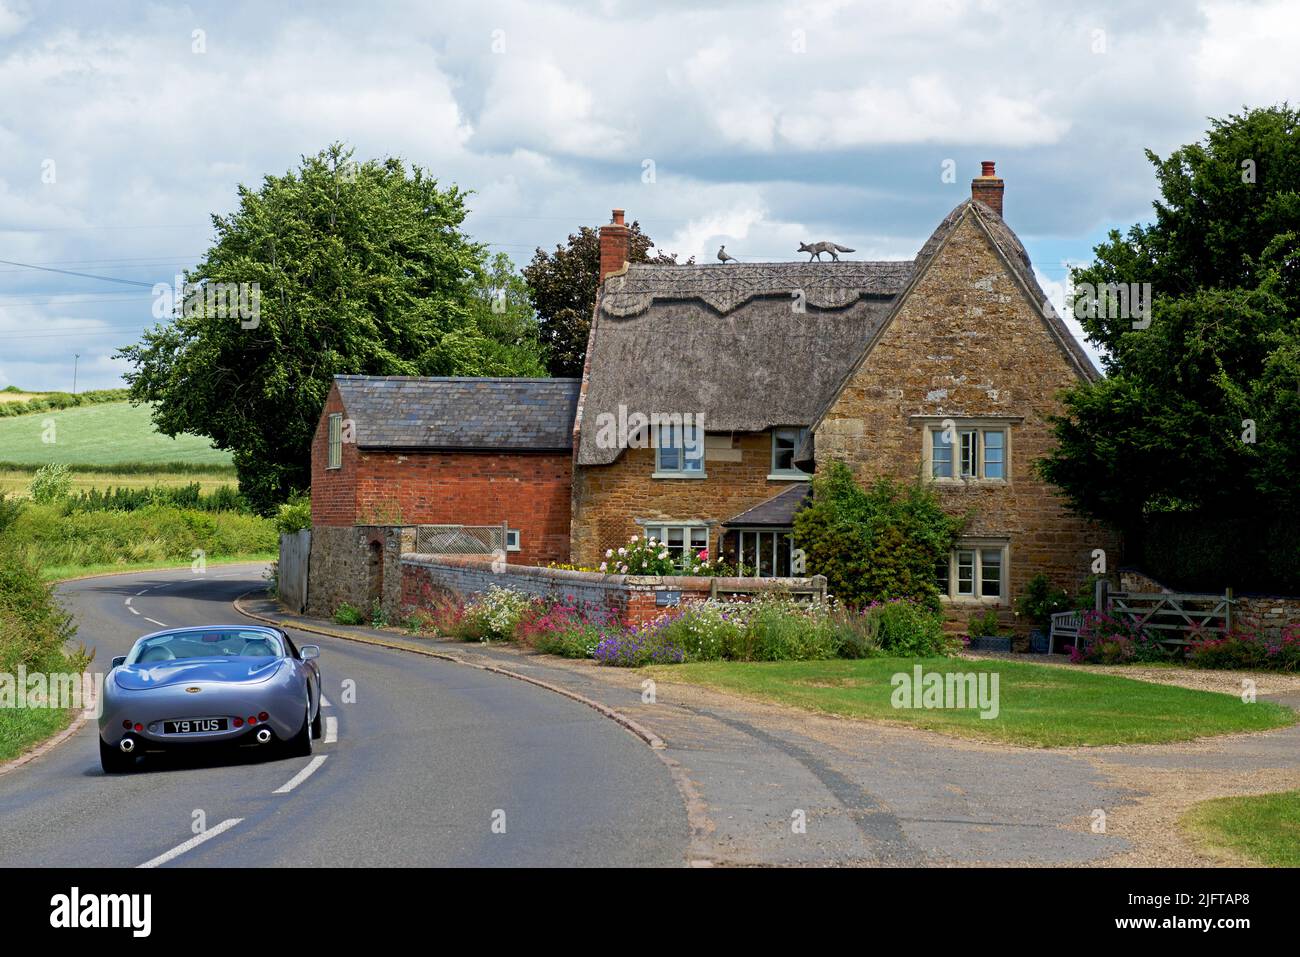 TVR Tuscan sports car approaching a thatched cottage in the village of Sutton Bassett, Northampton, England UK Stock Photo